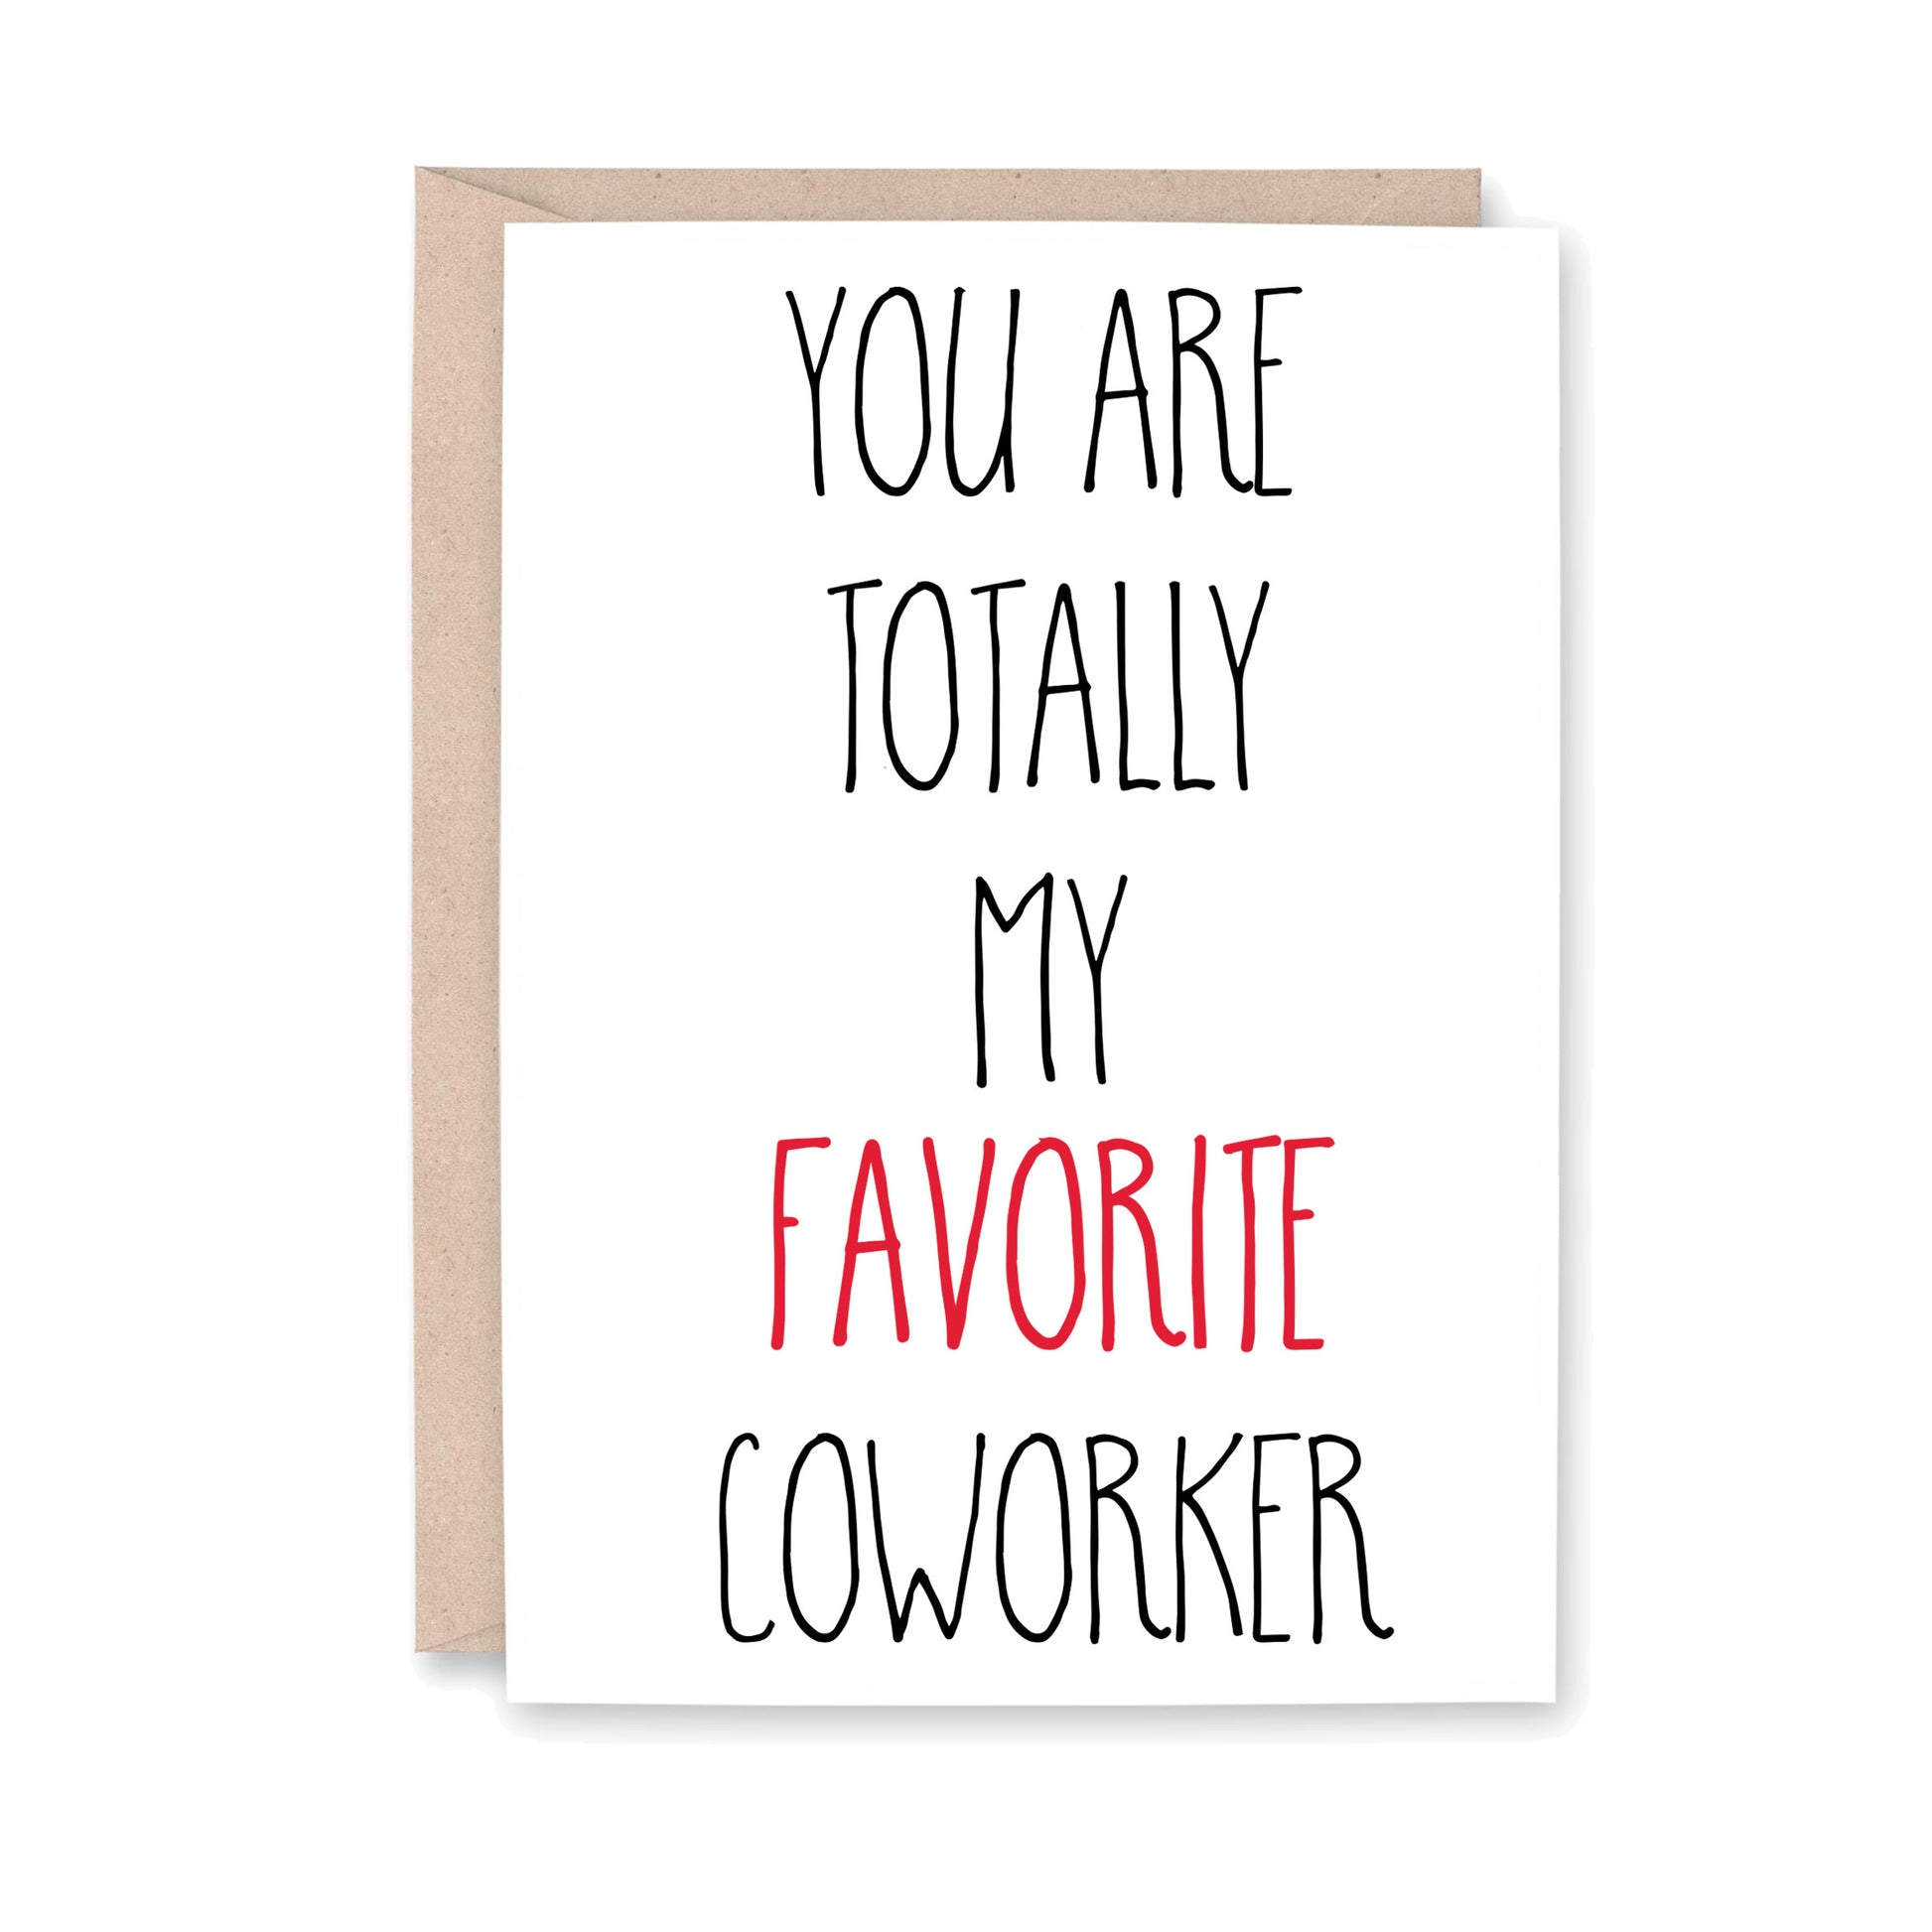 You are totally my favorite coworker